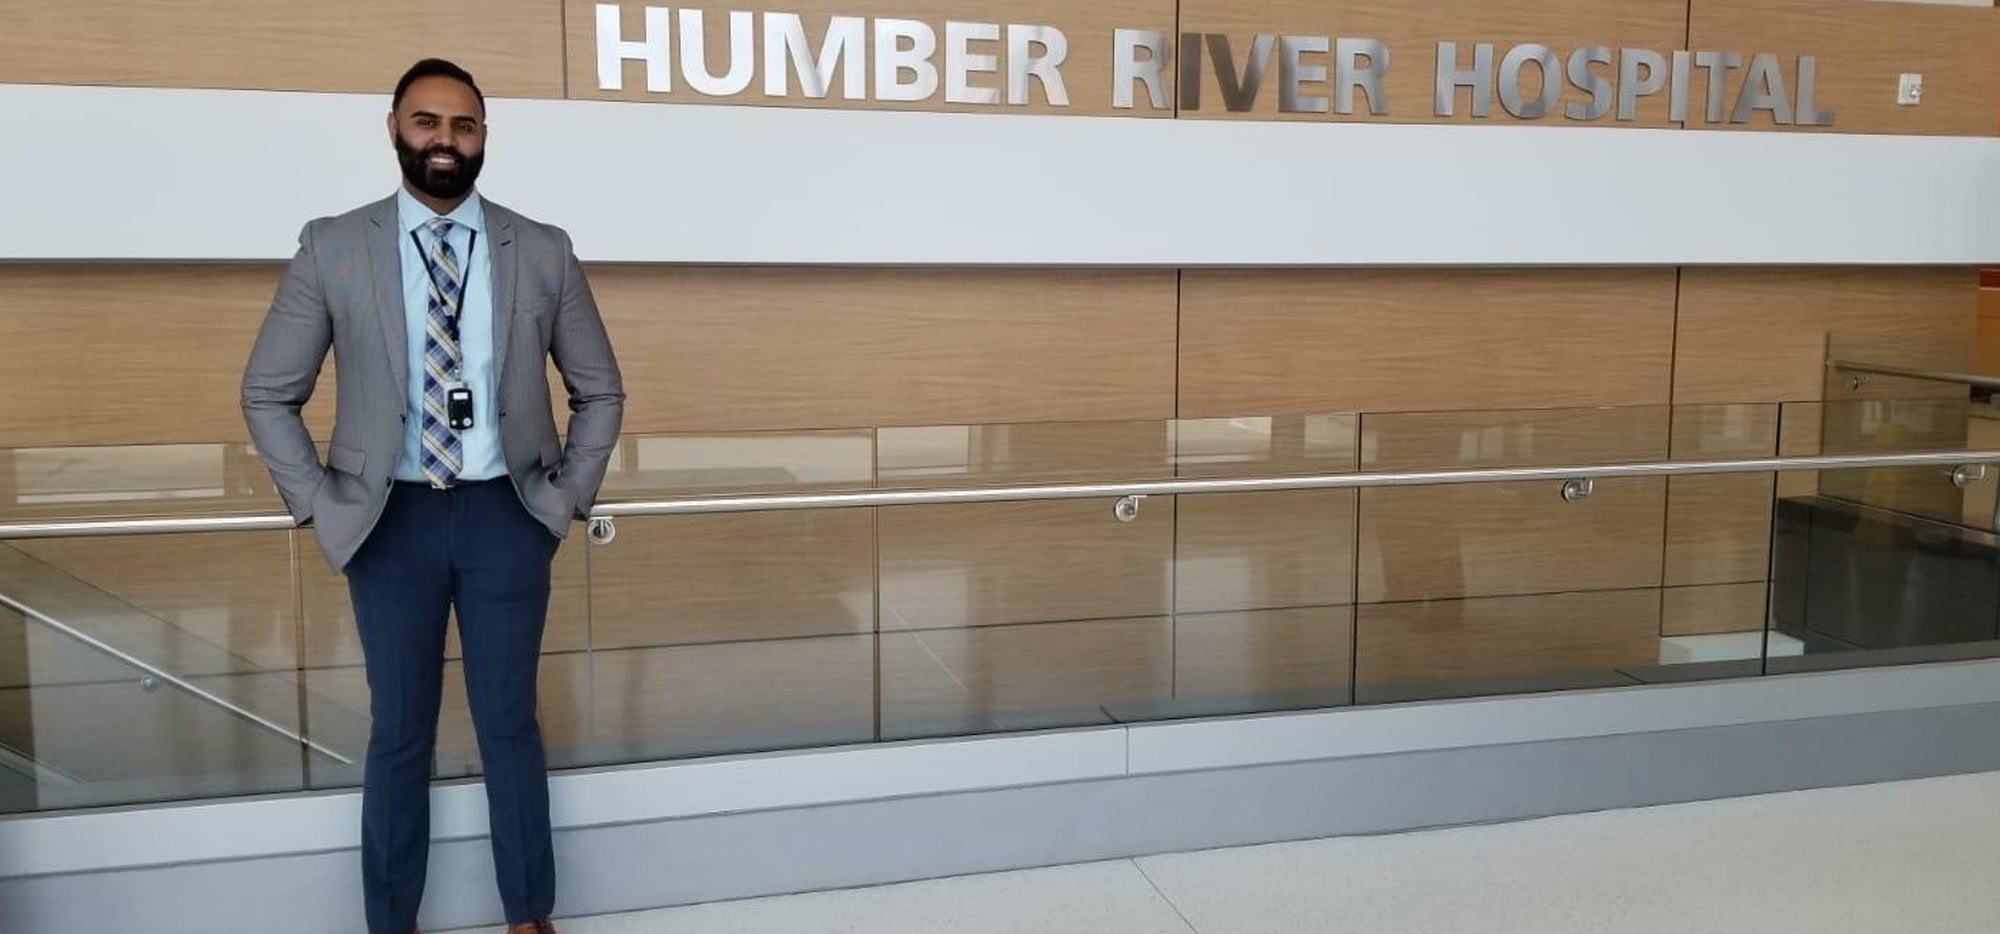 Gaganpal Mutti standing in front of a sign that says Humber River Hospital